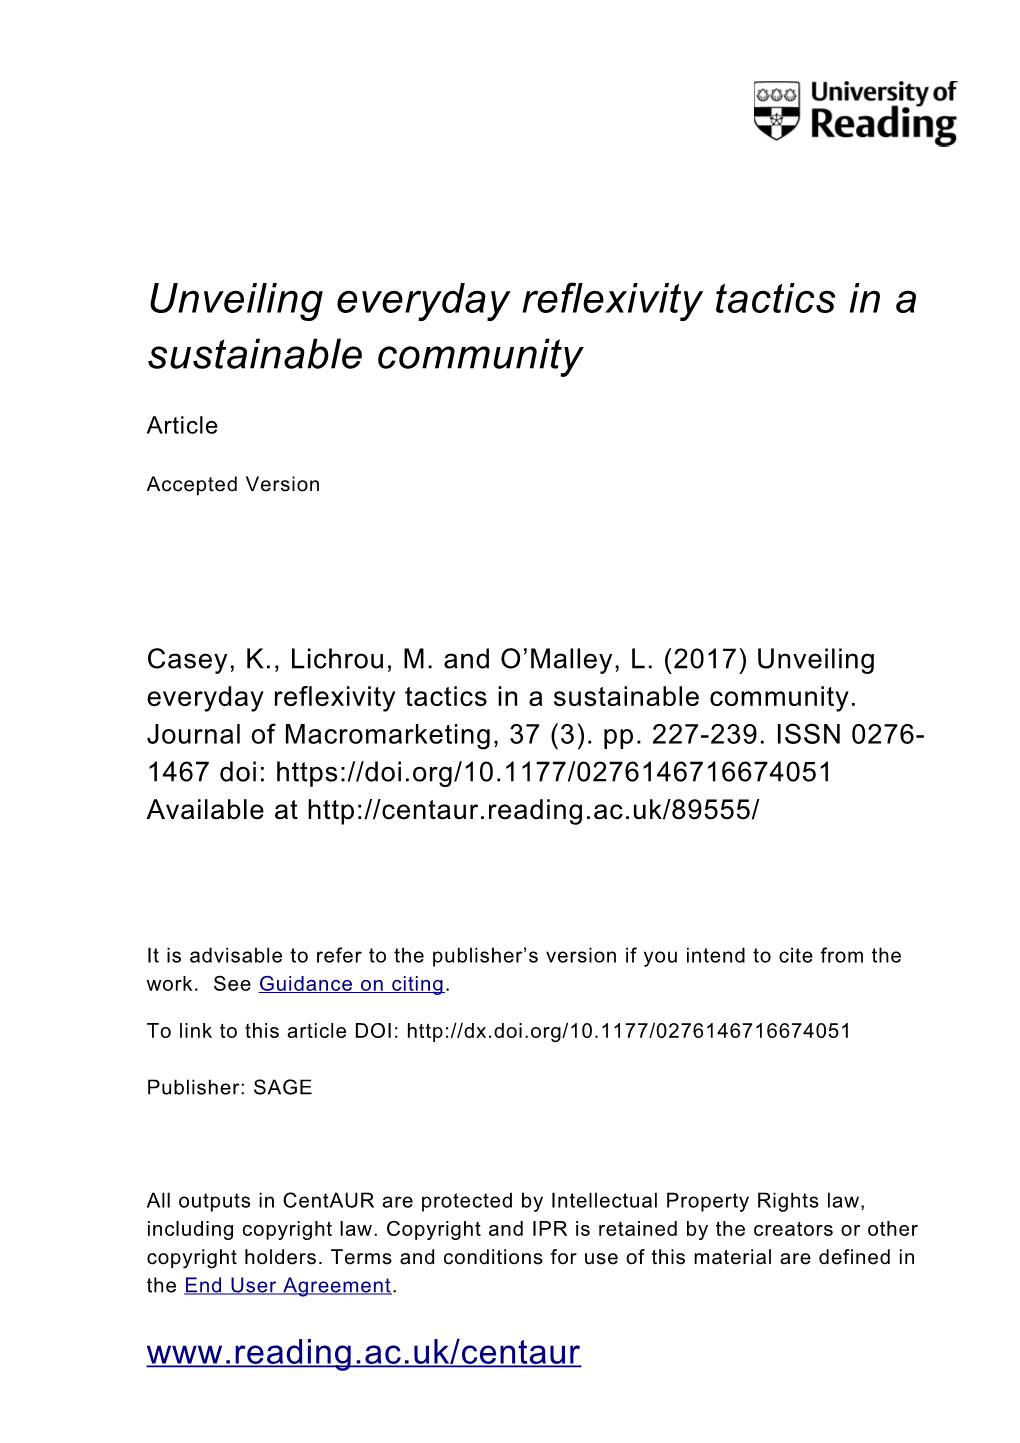 Unveiling Everyday Reflexivity Tactics in a Sustainable Community